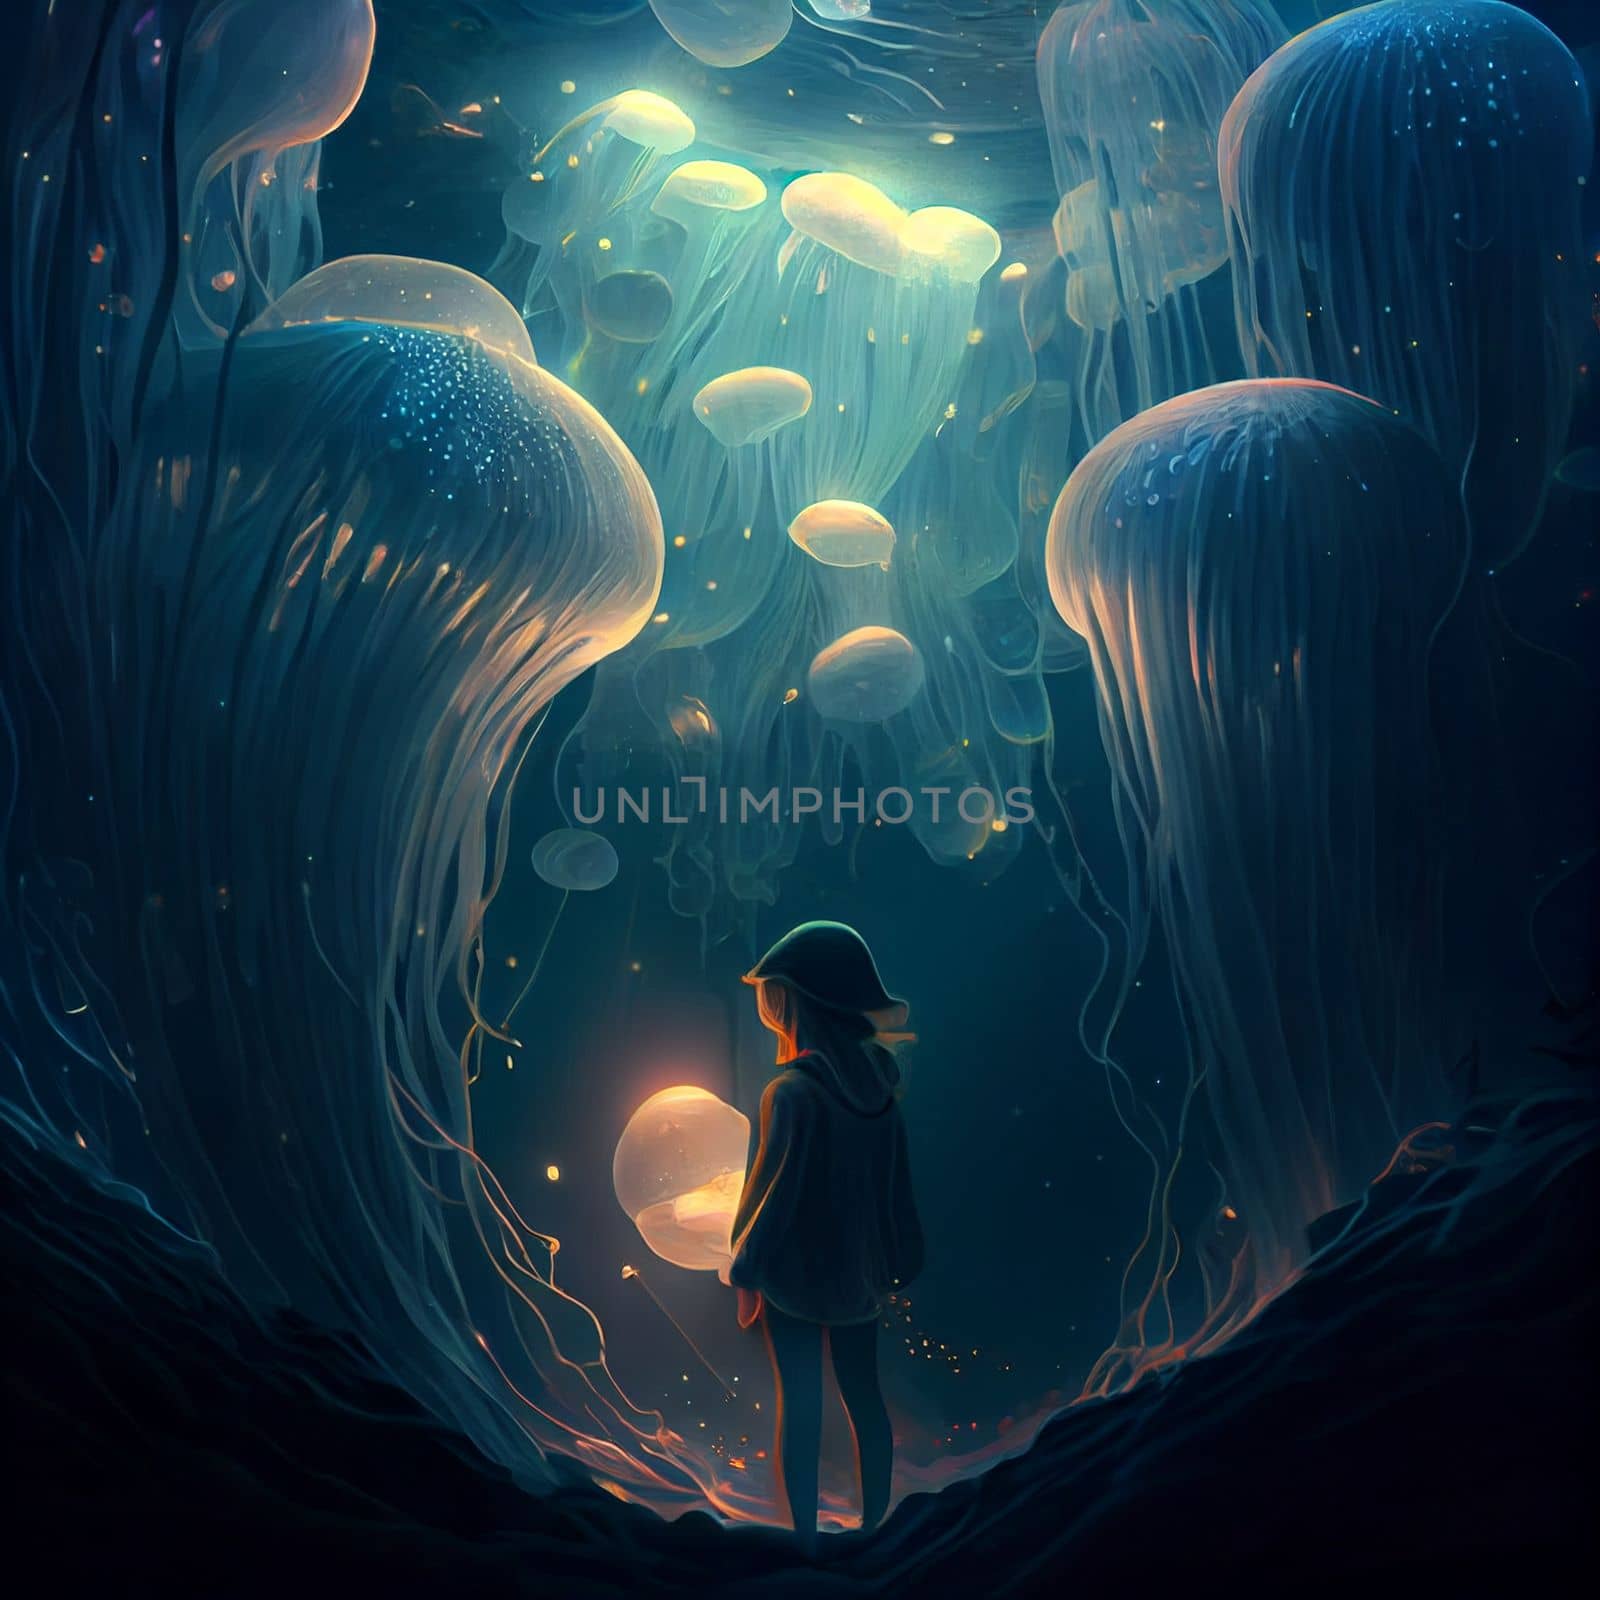 A girl stands around a flying flock of jellyfish by studiodav